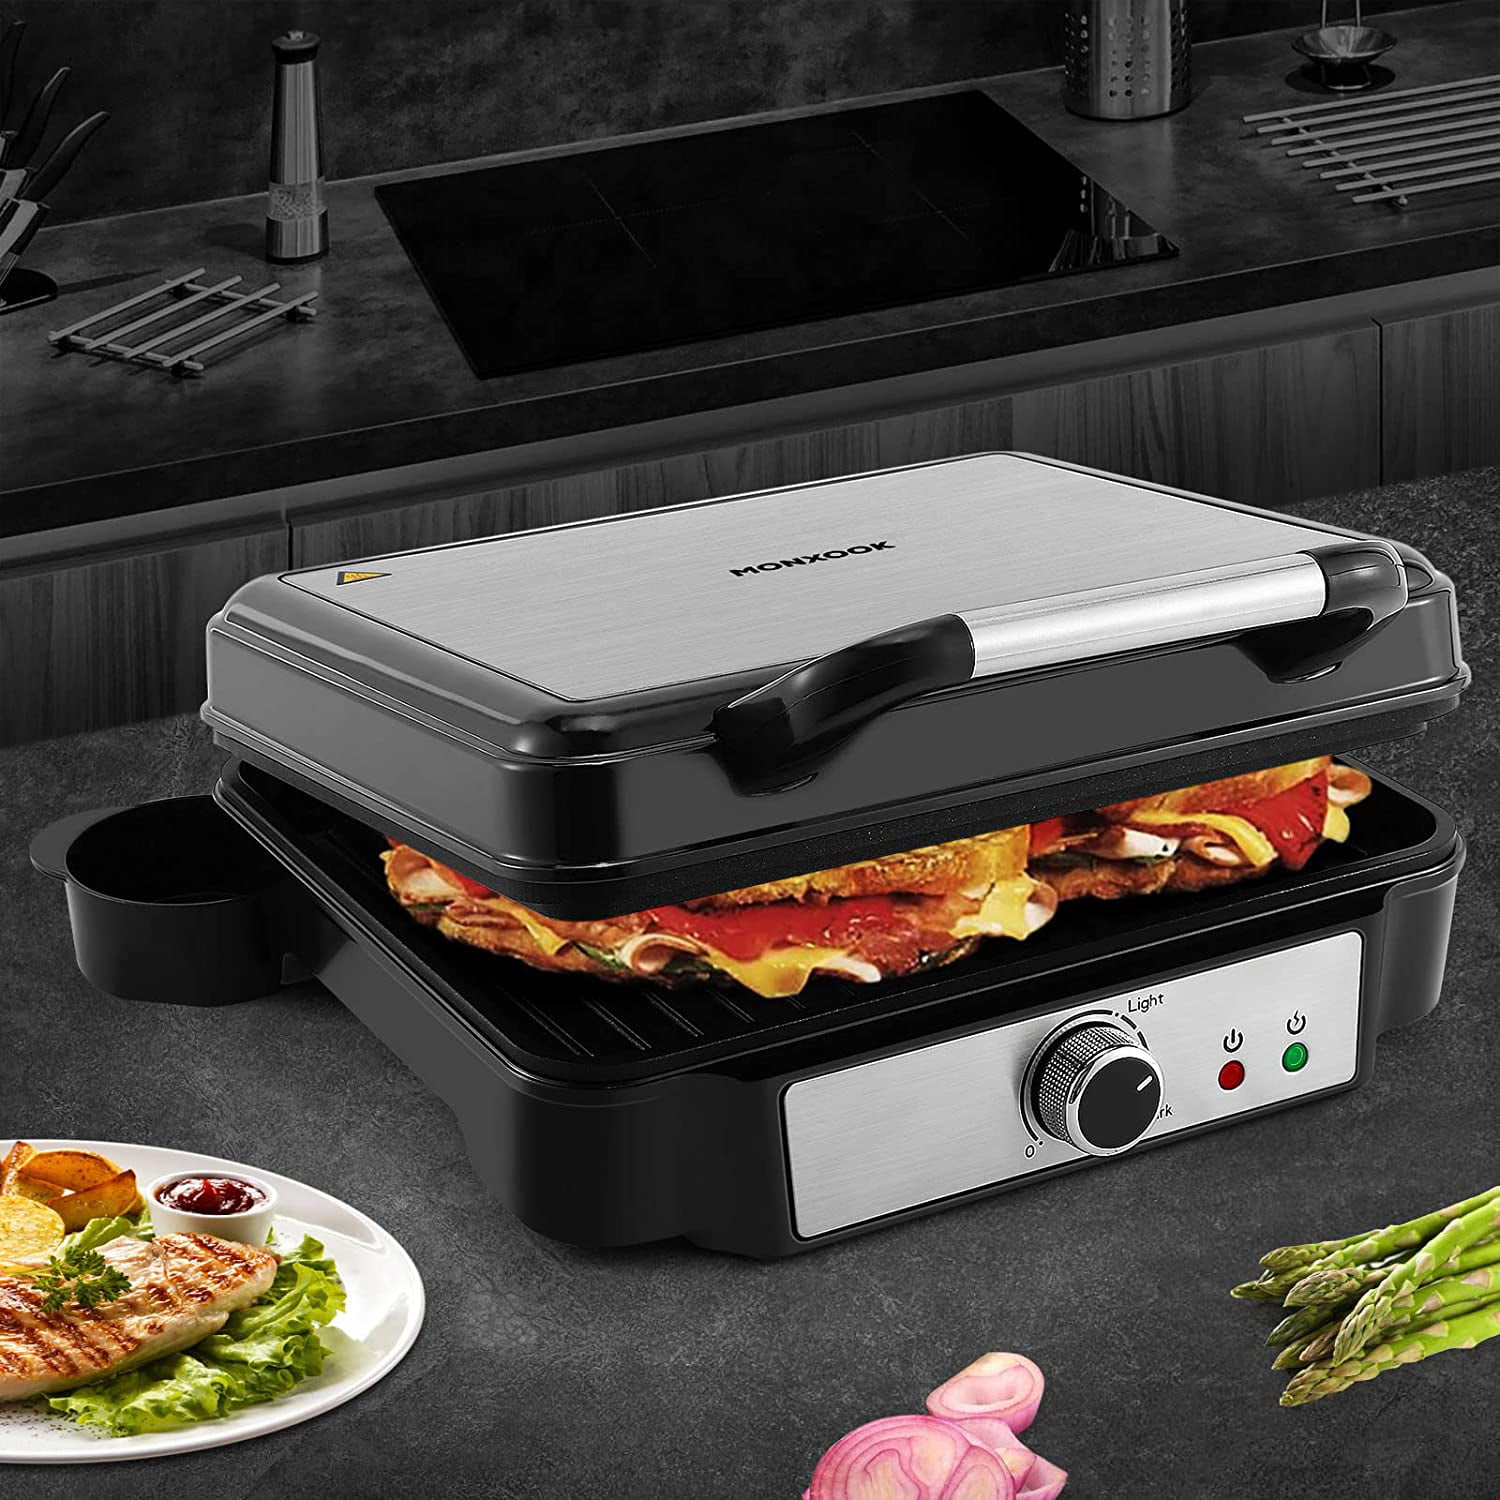 Monxook Panini Press Grill, 3-in-1 Sandwich Maker & Electric Grill, Non-Stick Coated Plates, Temperature Control, Opens 180 Degrees, Removable Drip